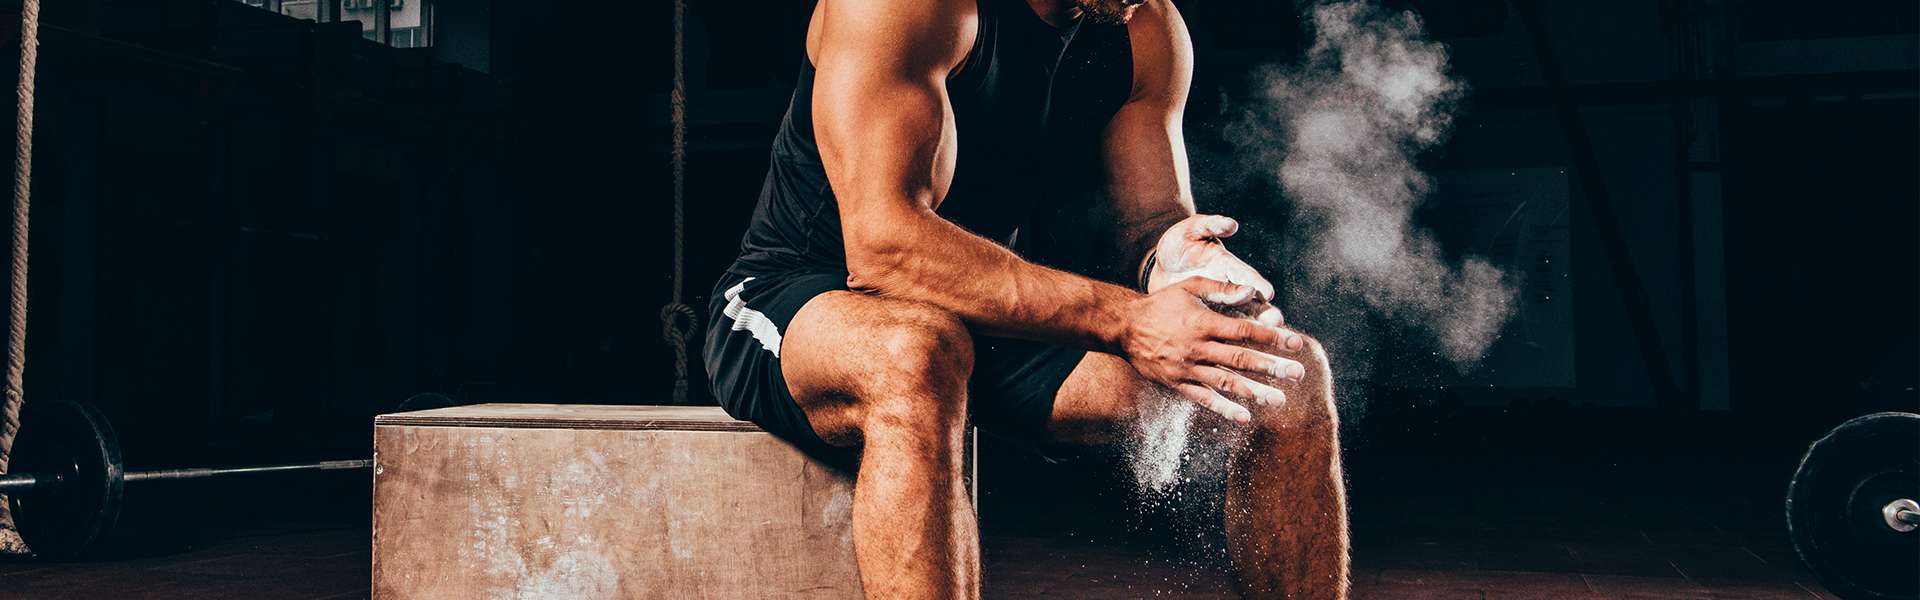 Pre-workout: what are they? Do they work?